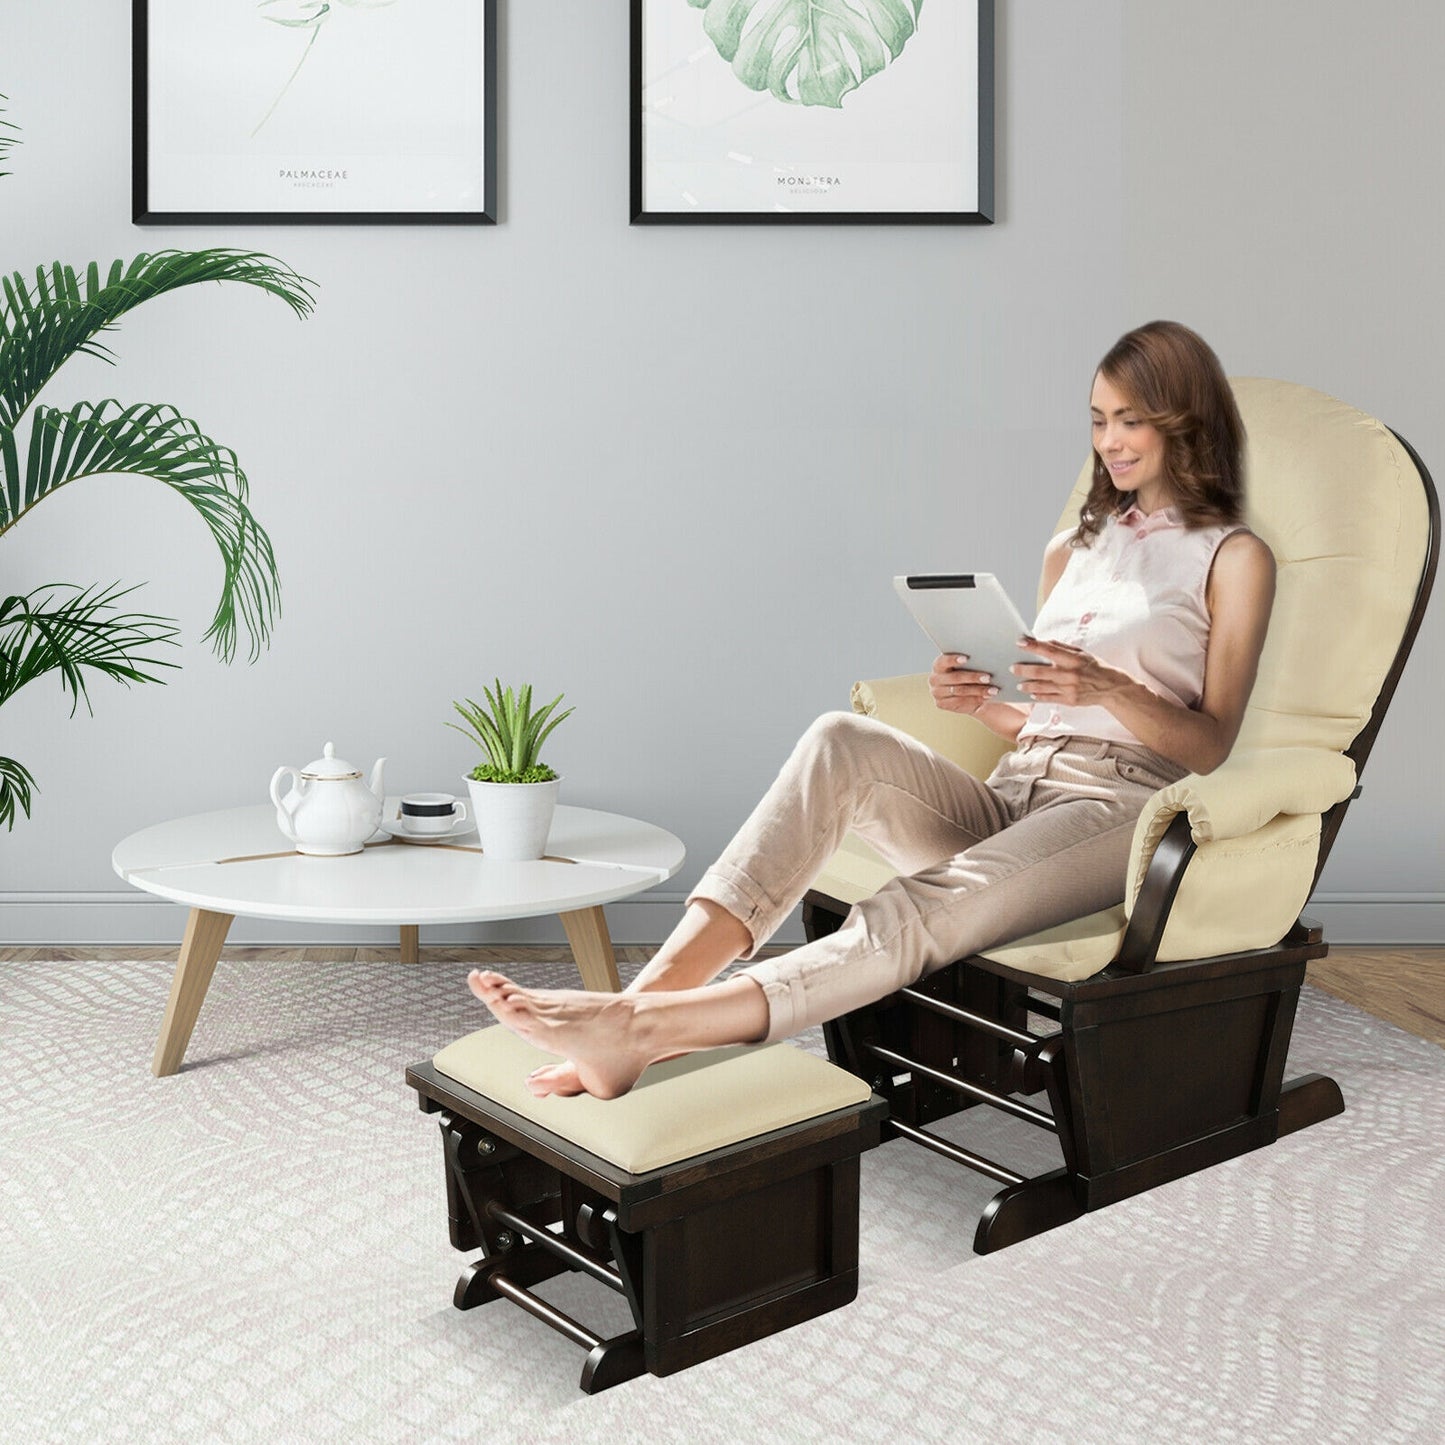 Wood Baby Glider and Ottoman Cushion Set with Padded Armrests for Nursing-Beige